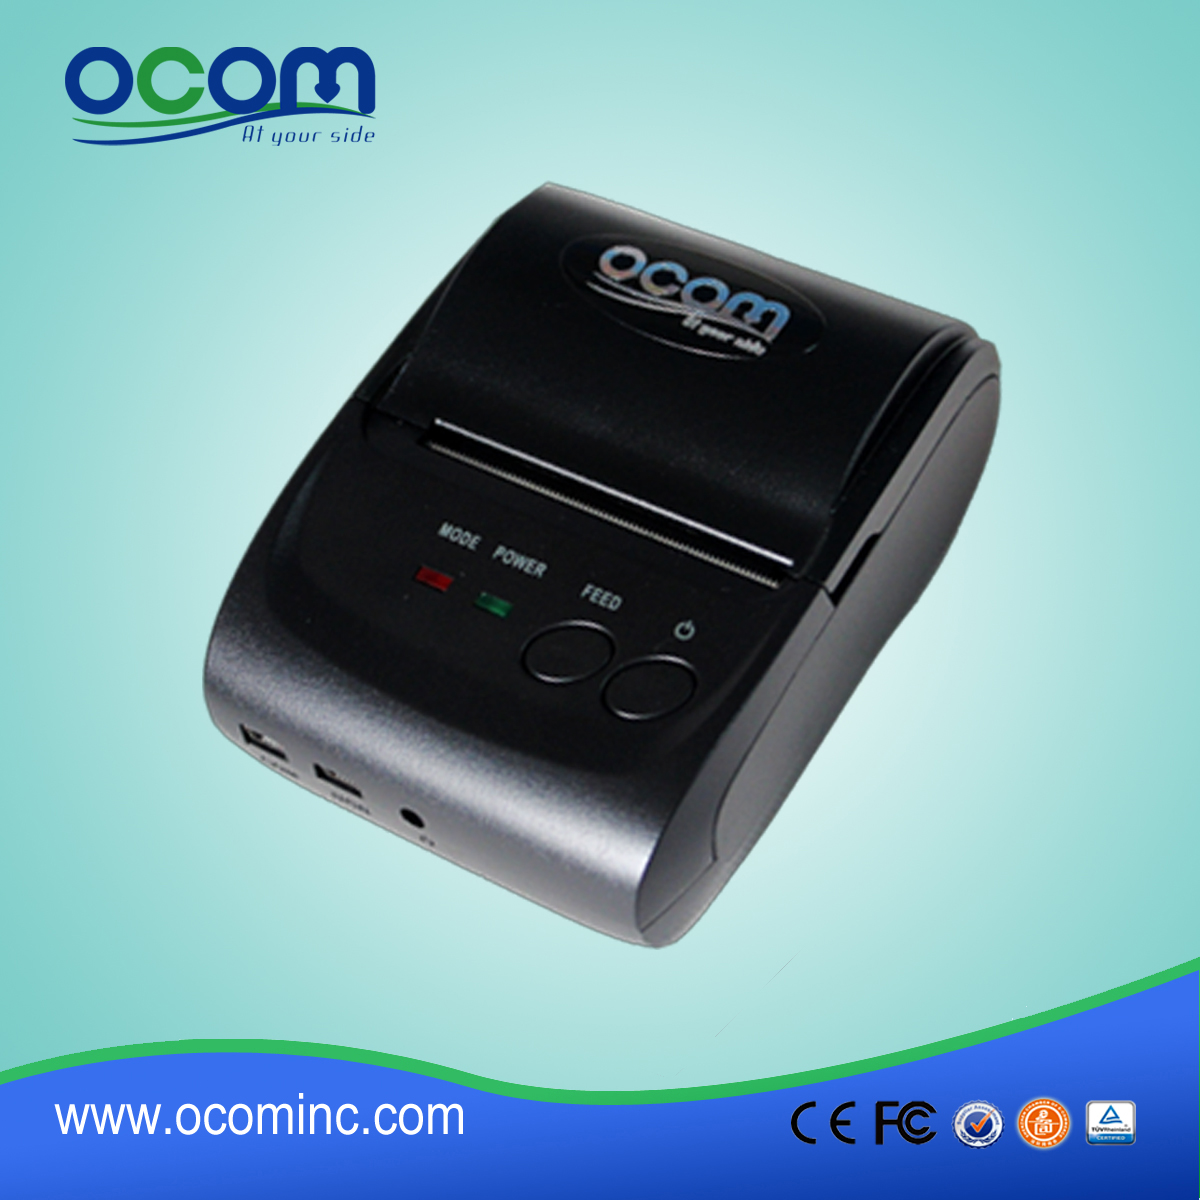 58mm mini draagbare Android Bluetooth thermische printer (OCPP-M05)